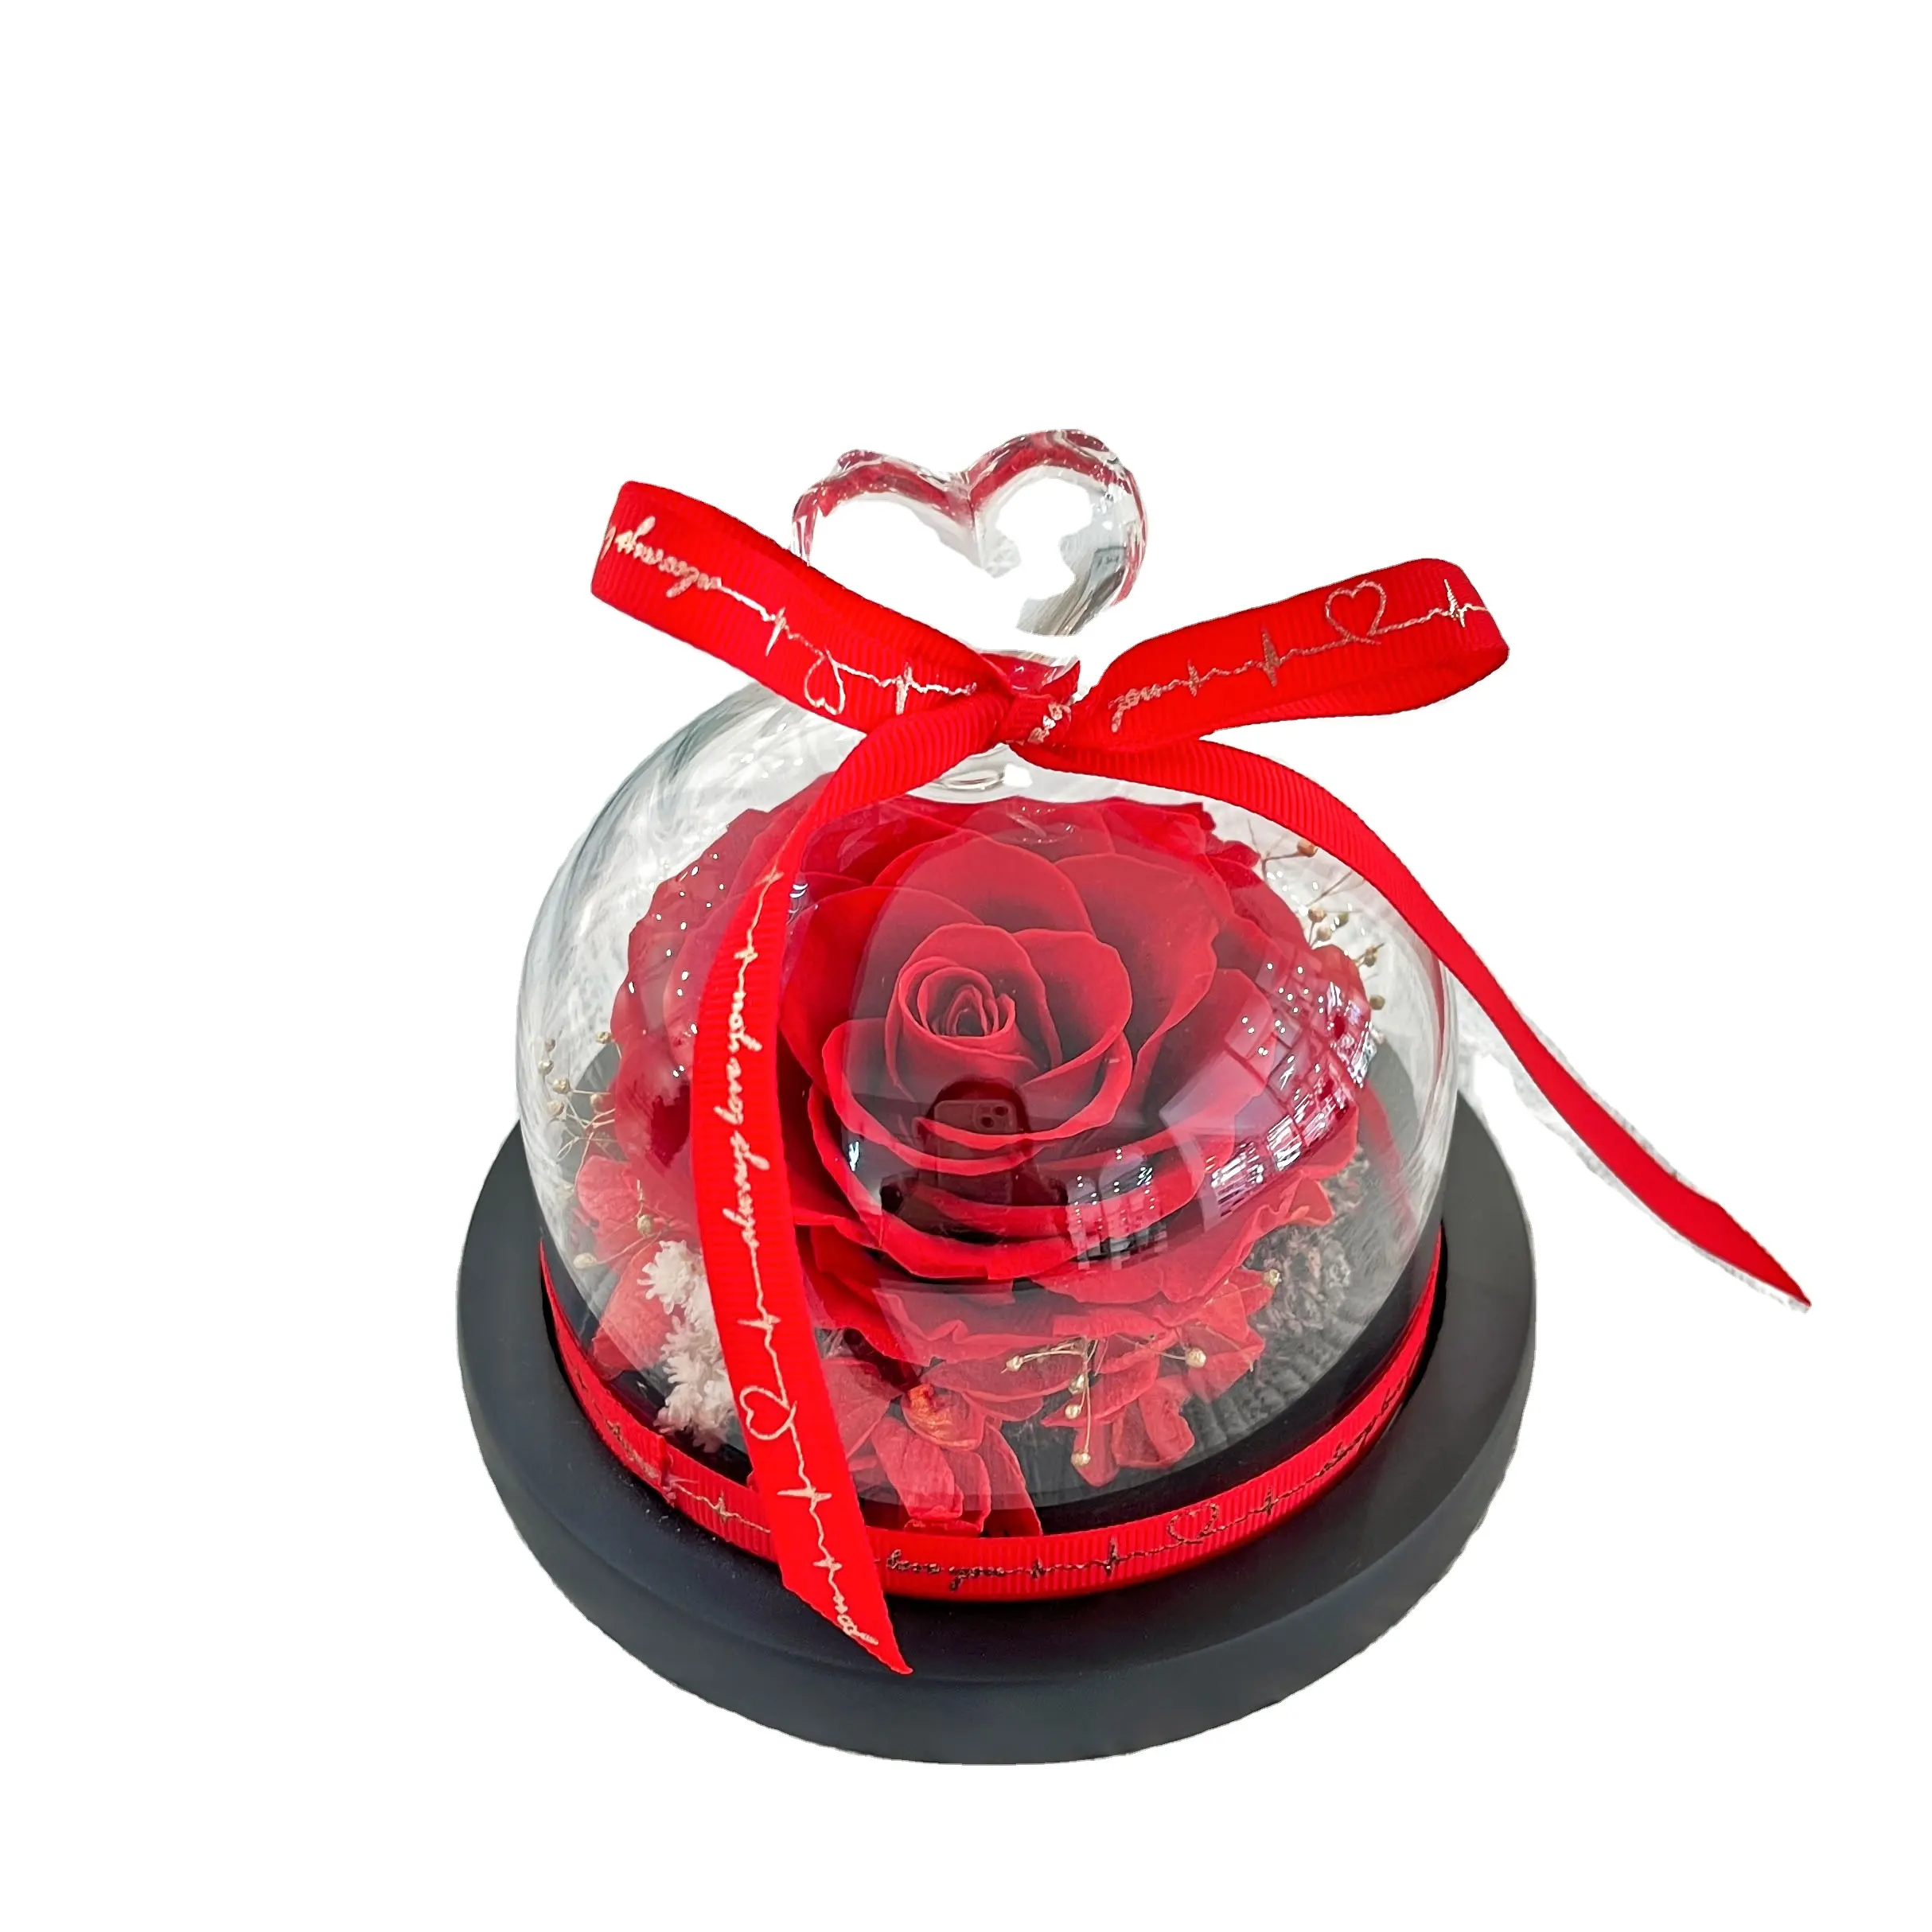 Hand Made Real Touch Stabilized Roses Everlasting Preserved Roses And Plants In Glass Dome